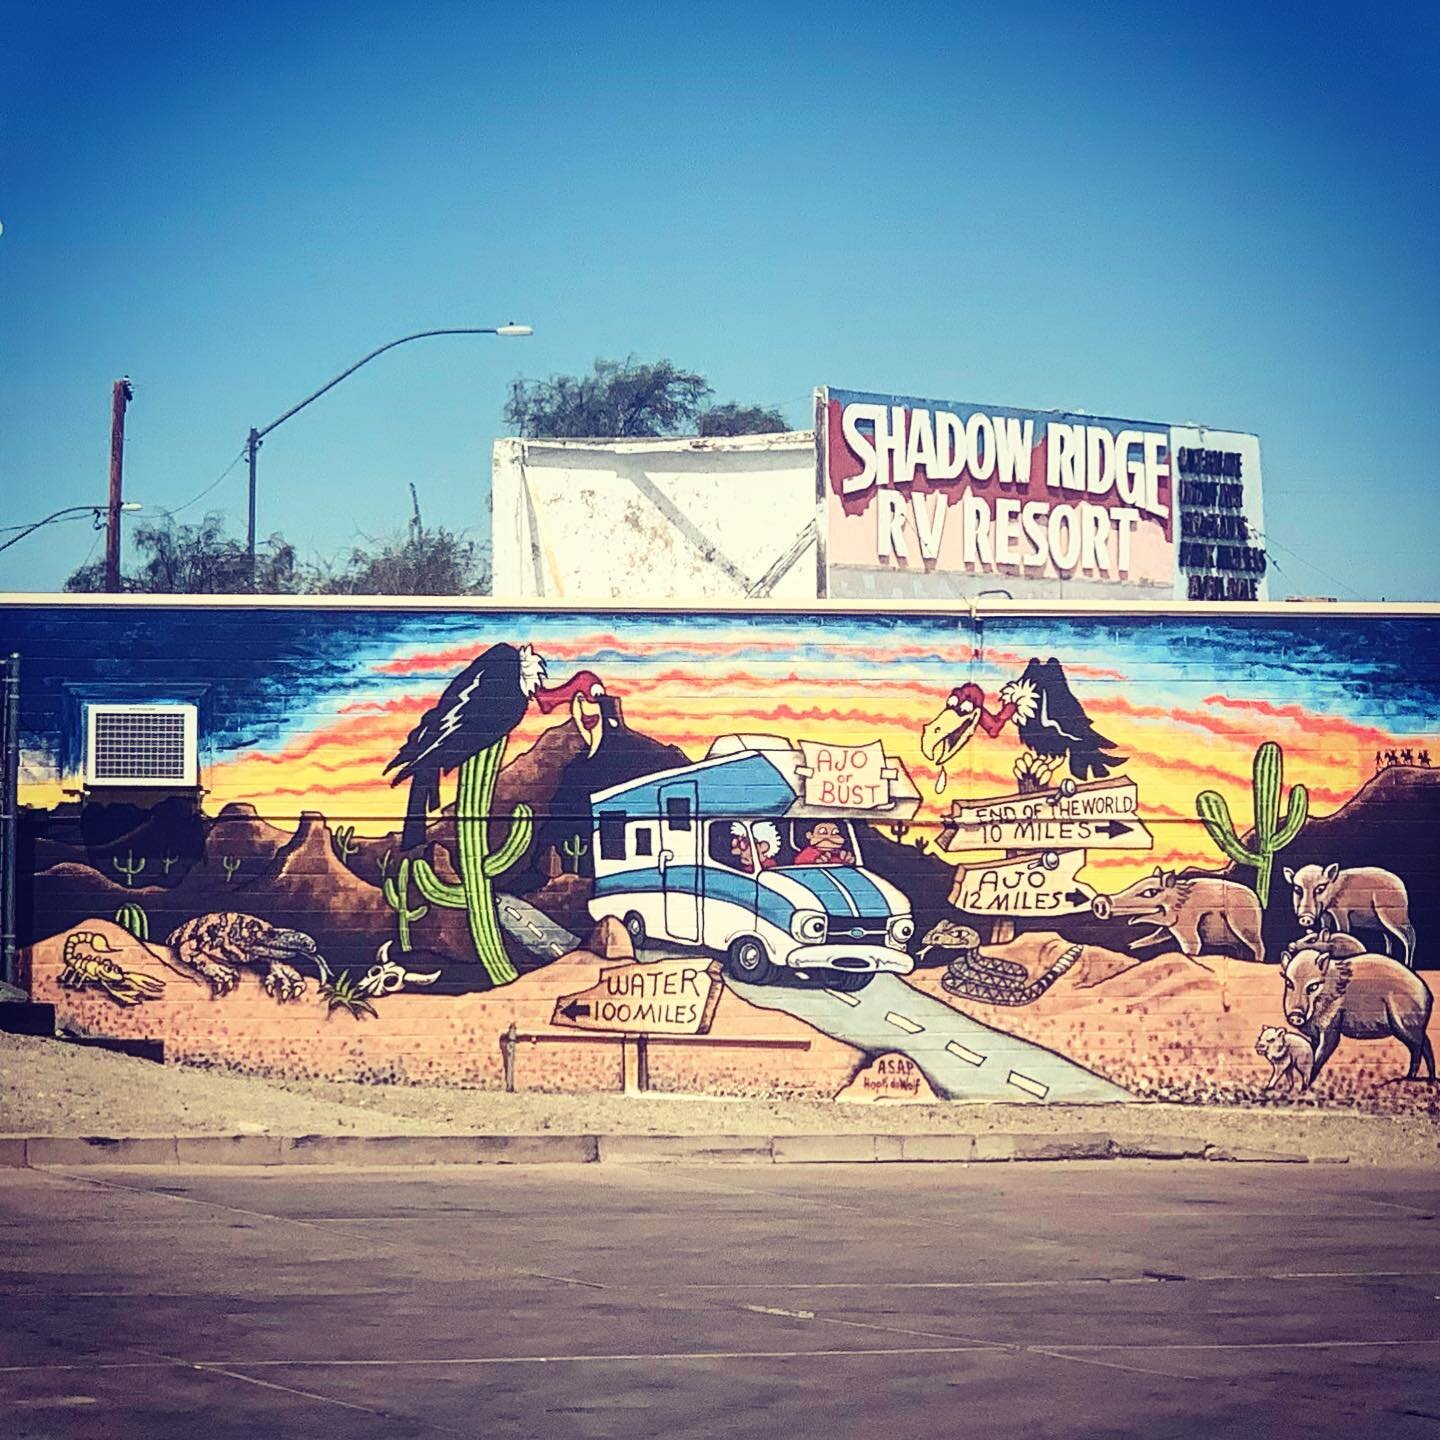 We busted Ajo, and kept driving all the way to a Mexican beach town for a day trip. Then, it rained, so we ate lots of seafood, and drove back to Arizona.  #mexicoborder #arizonaborder #mexicanbeach